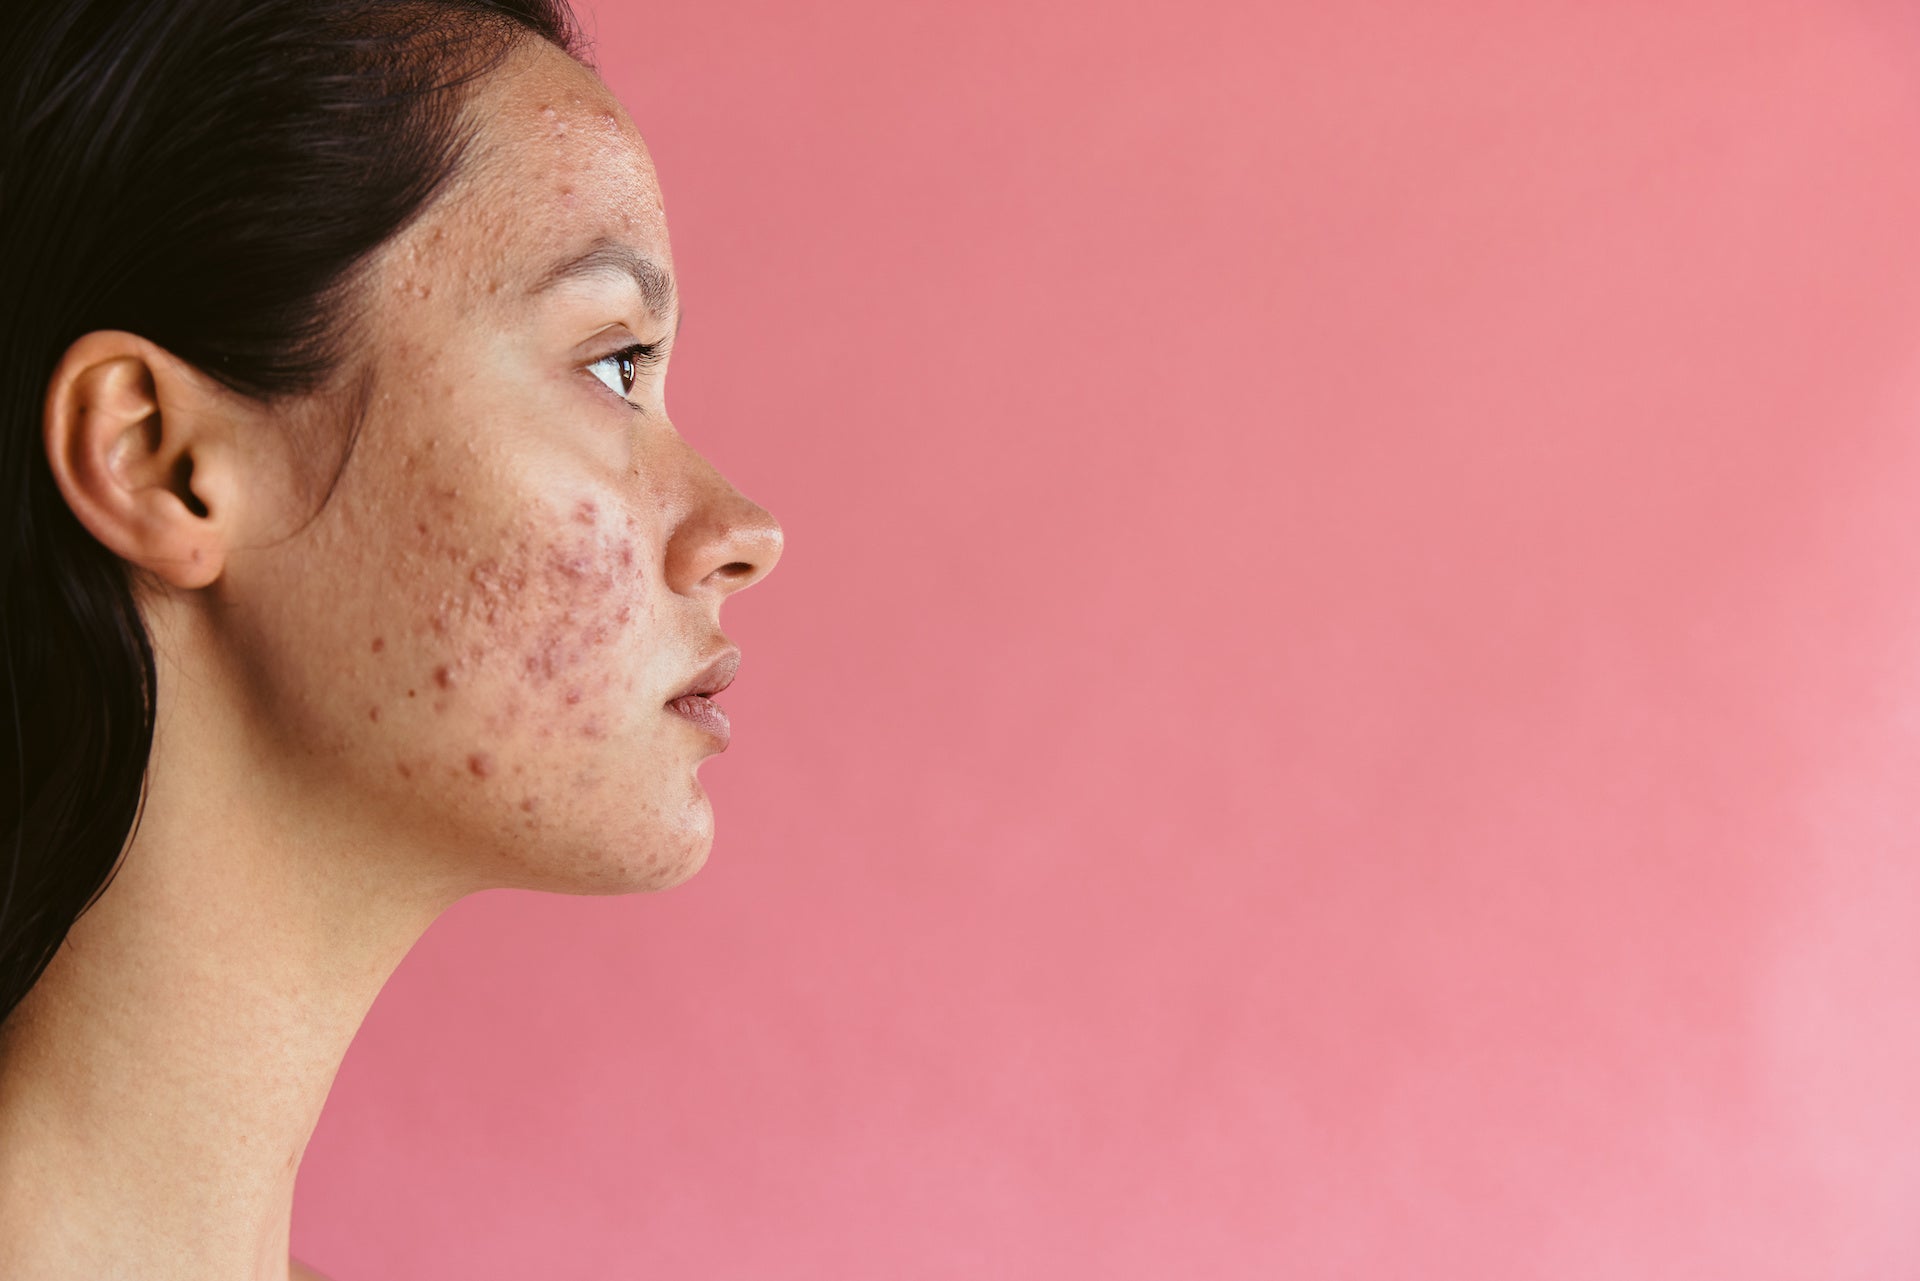 Acne 101 - What kind of acne do I have?